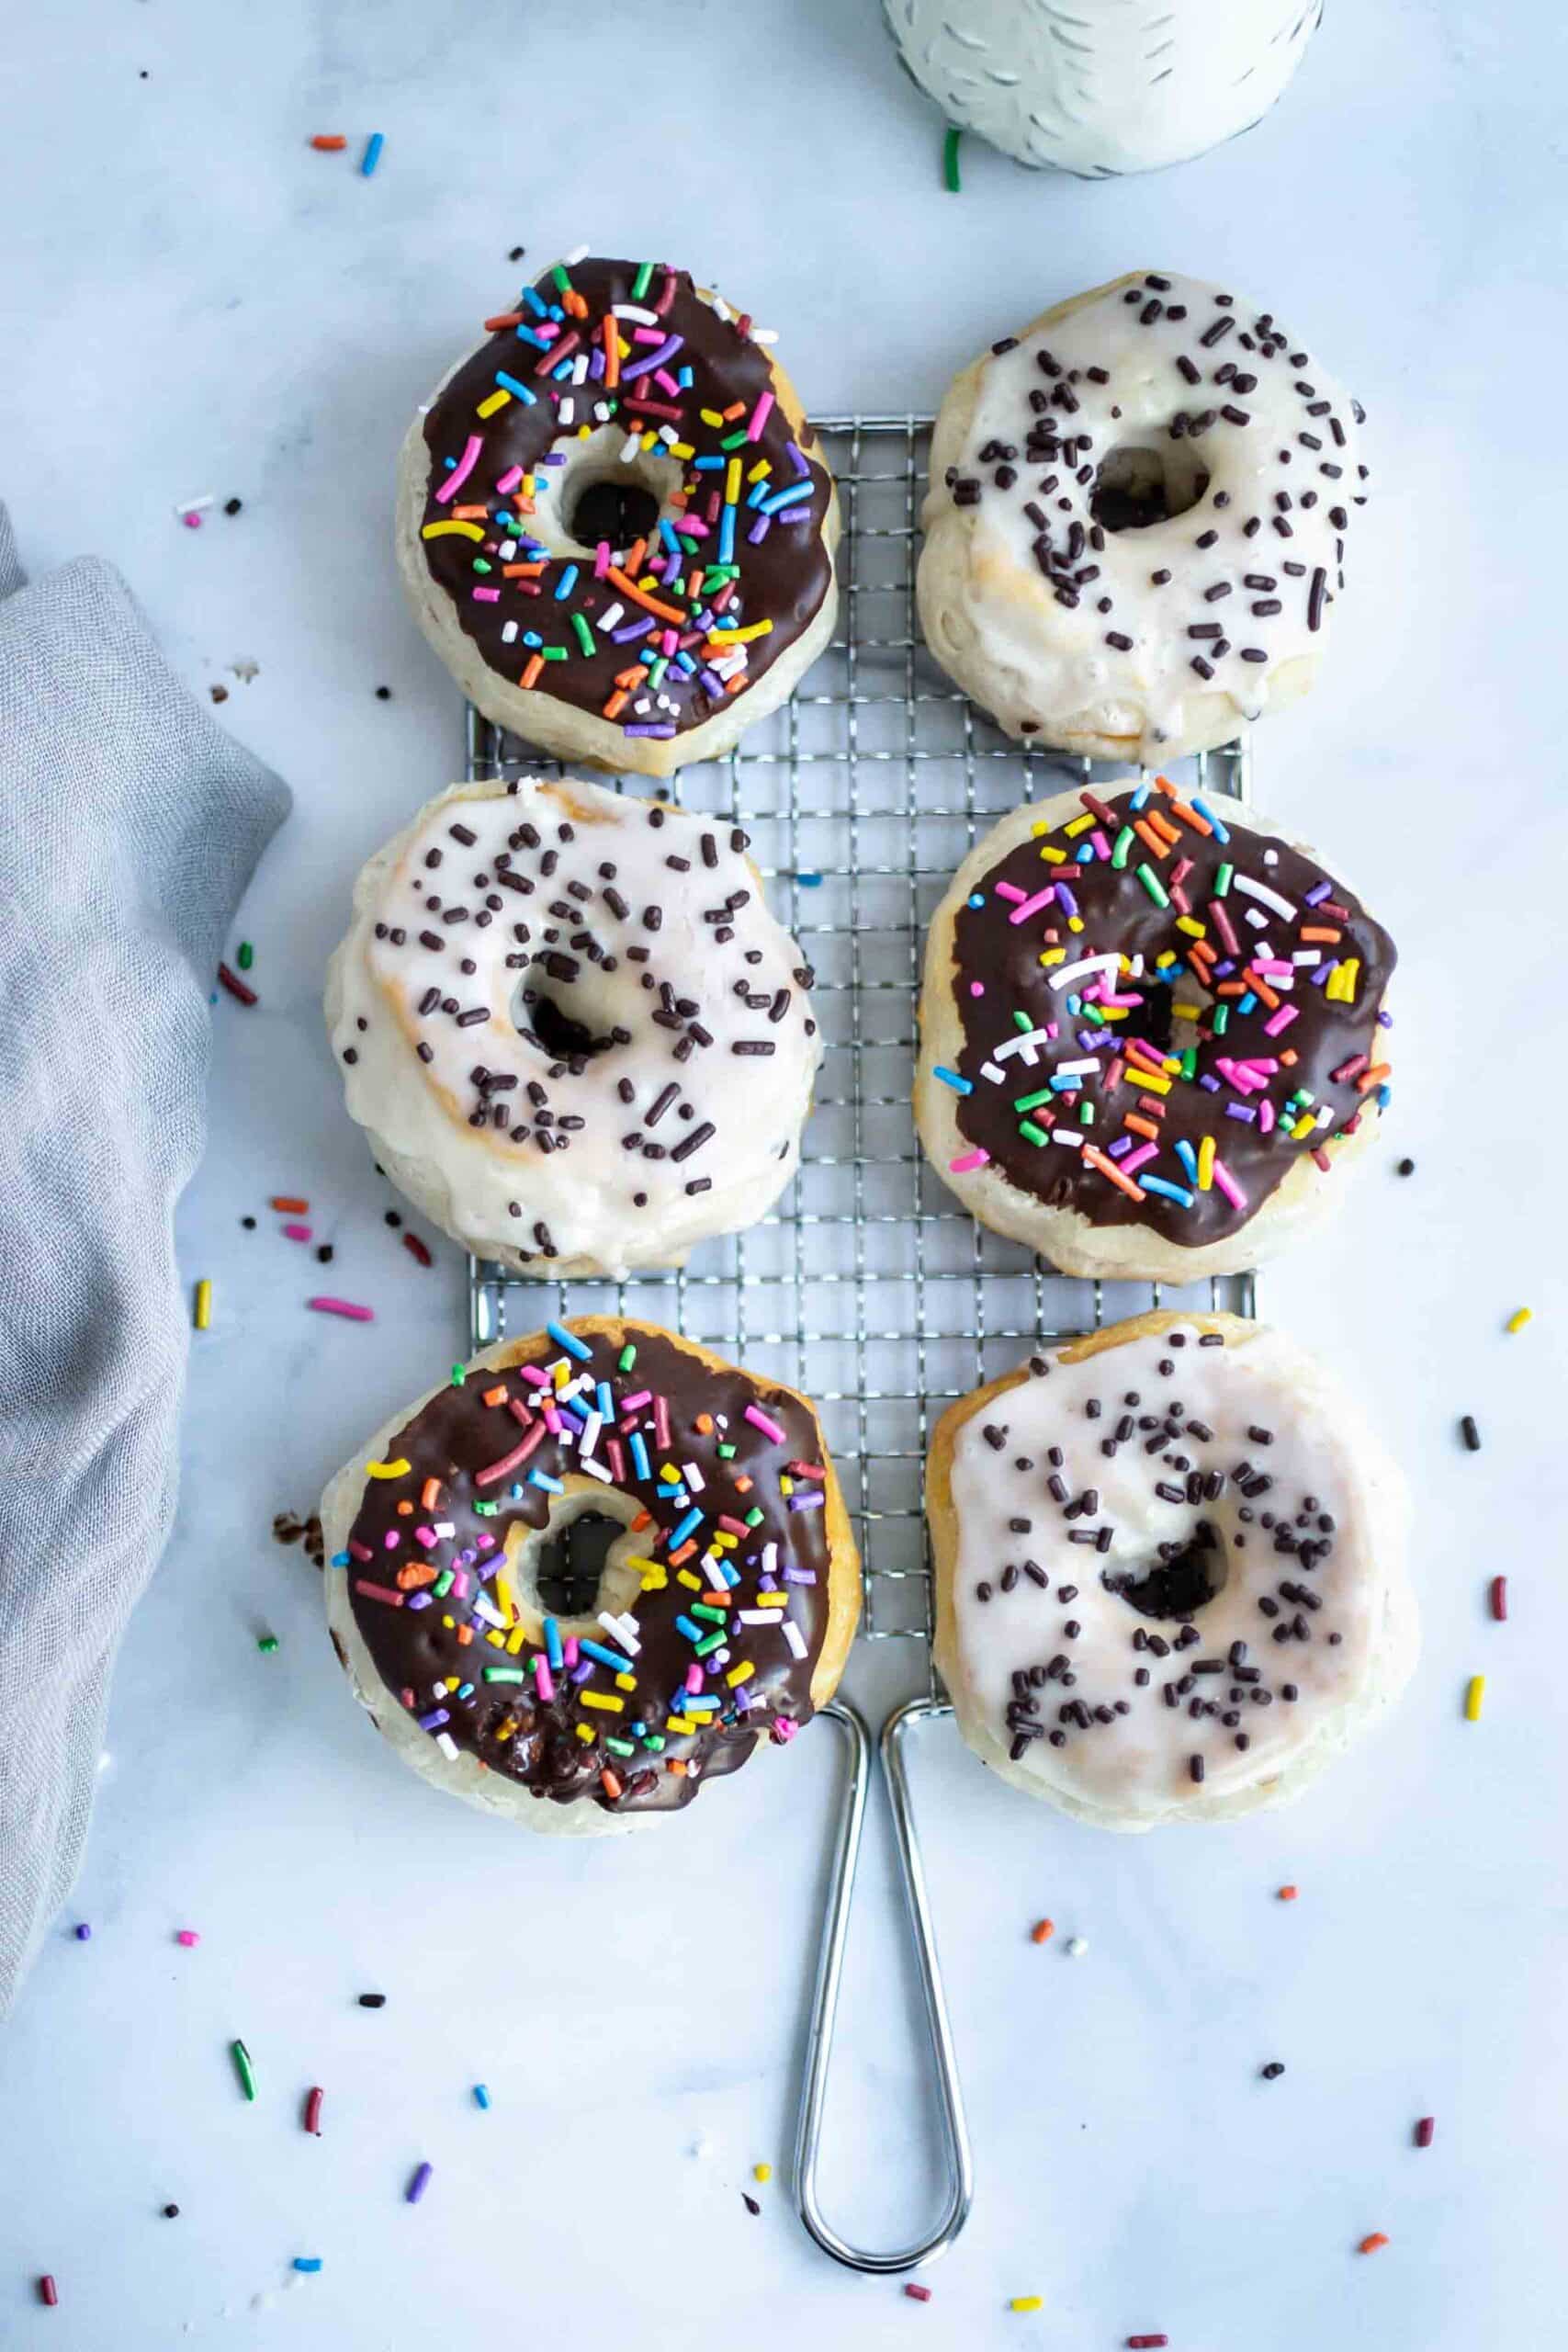 Chocolate and vanilla glazed air fryer biscuit doughnuts with sprinkles and chocolate sauce.